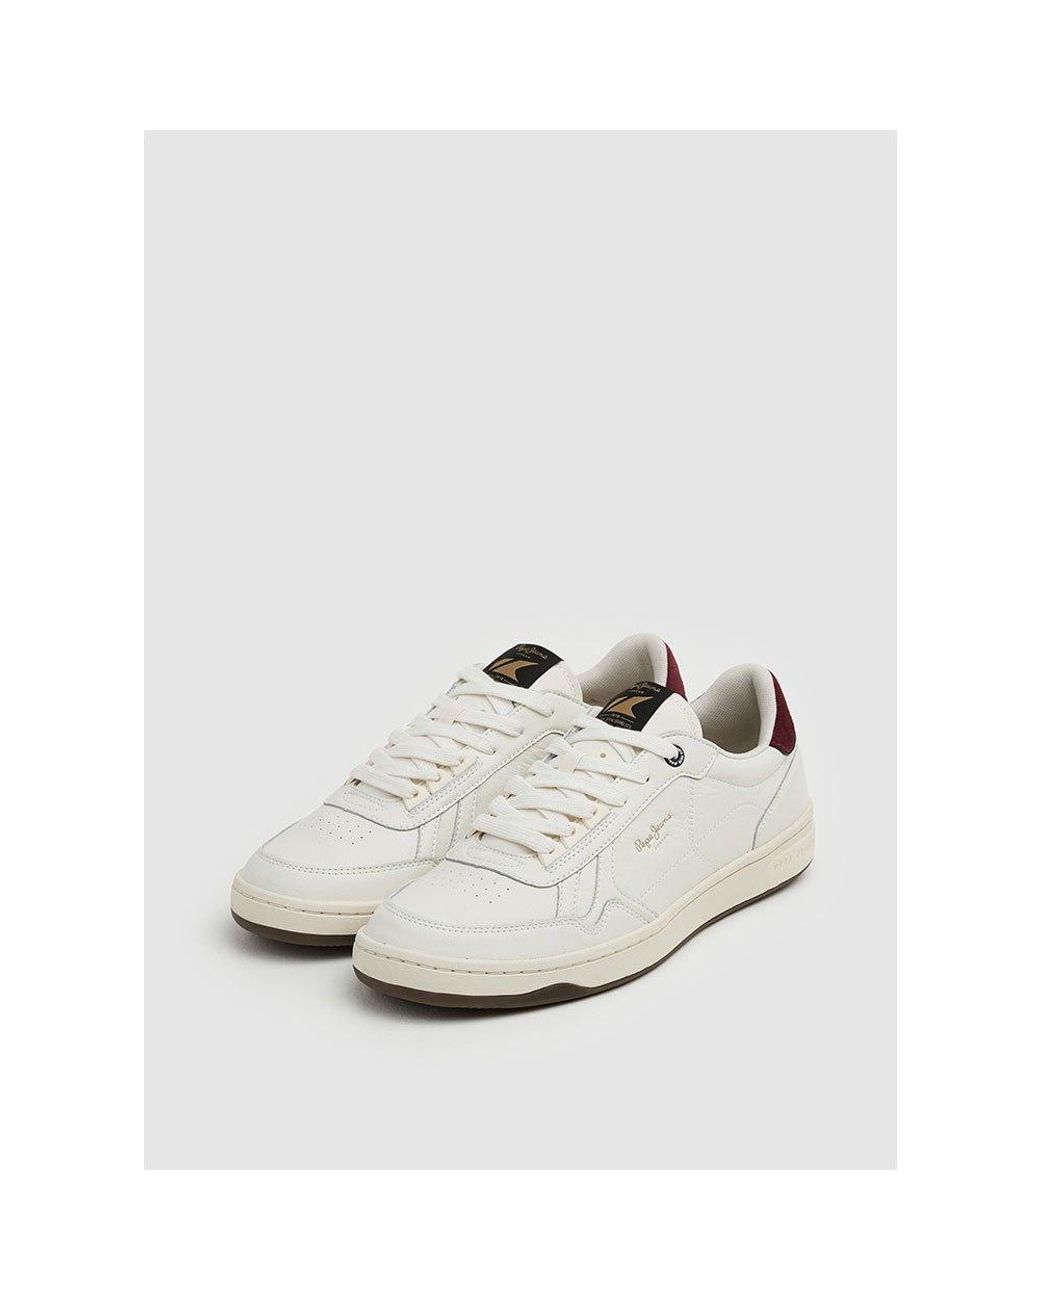 Pepe Jeans Kore Vintage Trainers in White for Men | Lyst